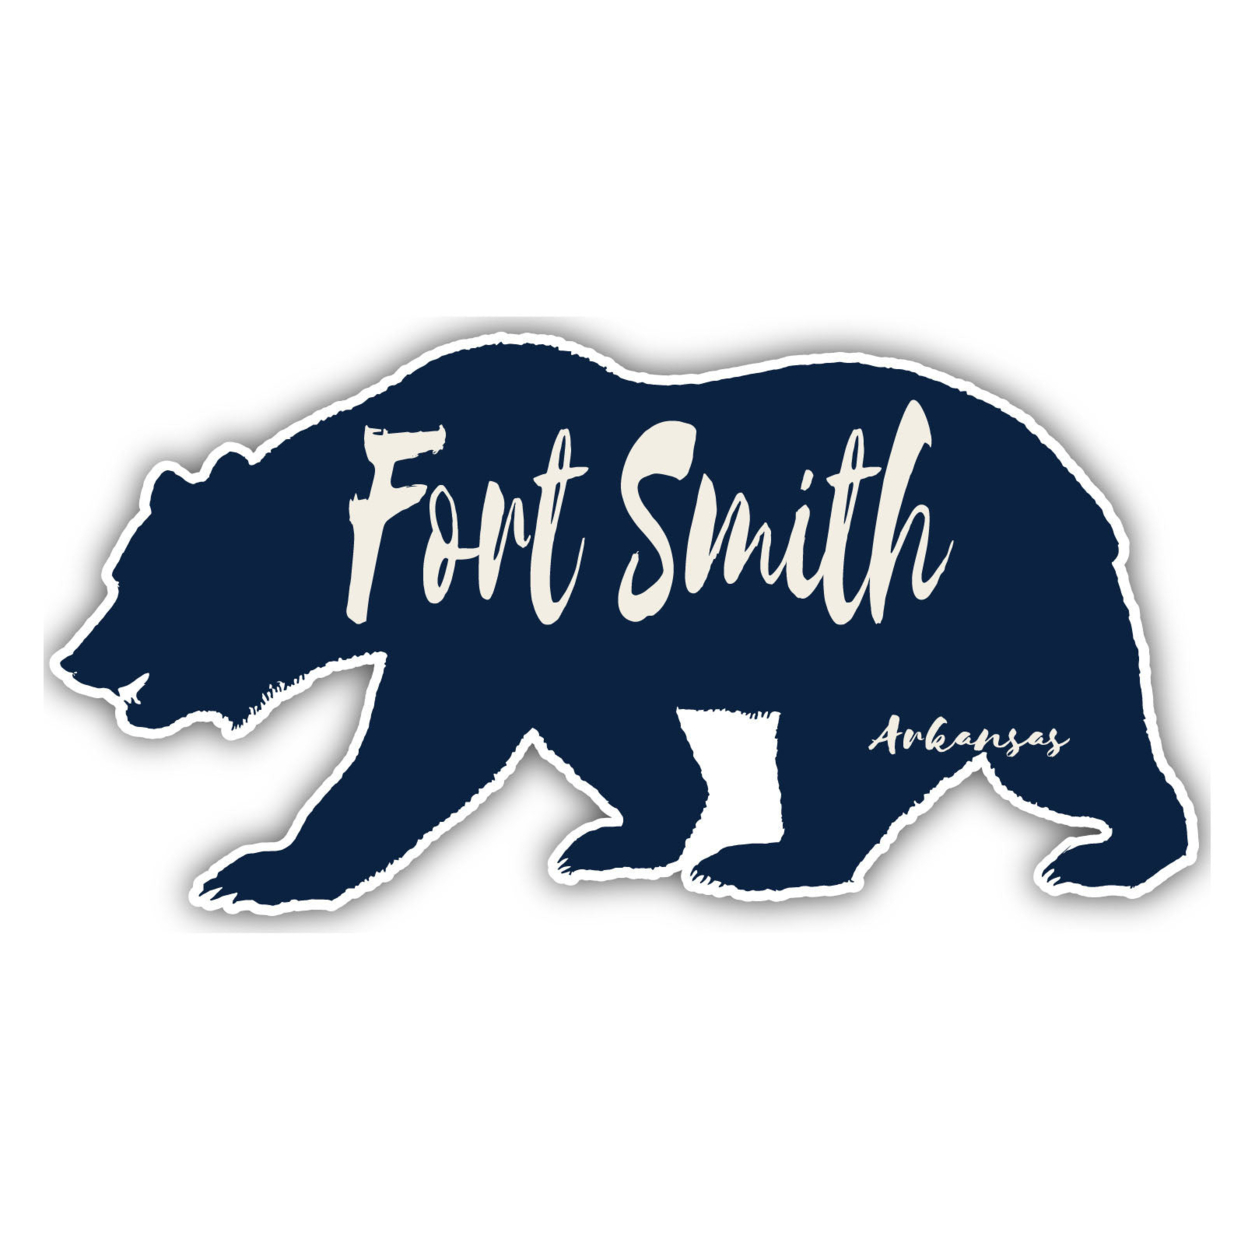 Fort Smith Arkansas Souvenir Decorative Stickers (Choose Theme And Size) - 4-Pack, 12-Inch, Bear